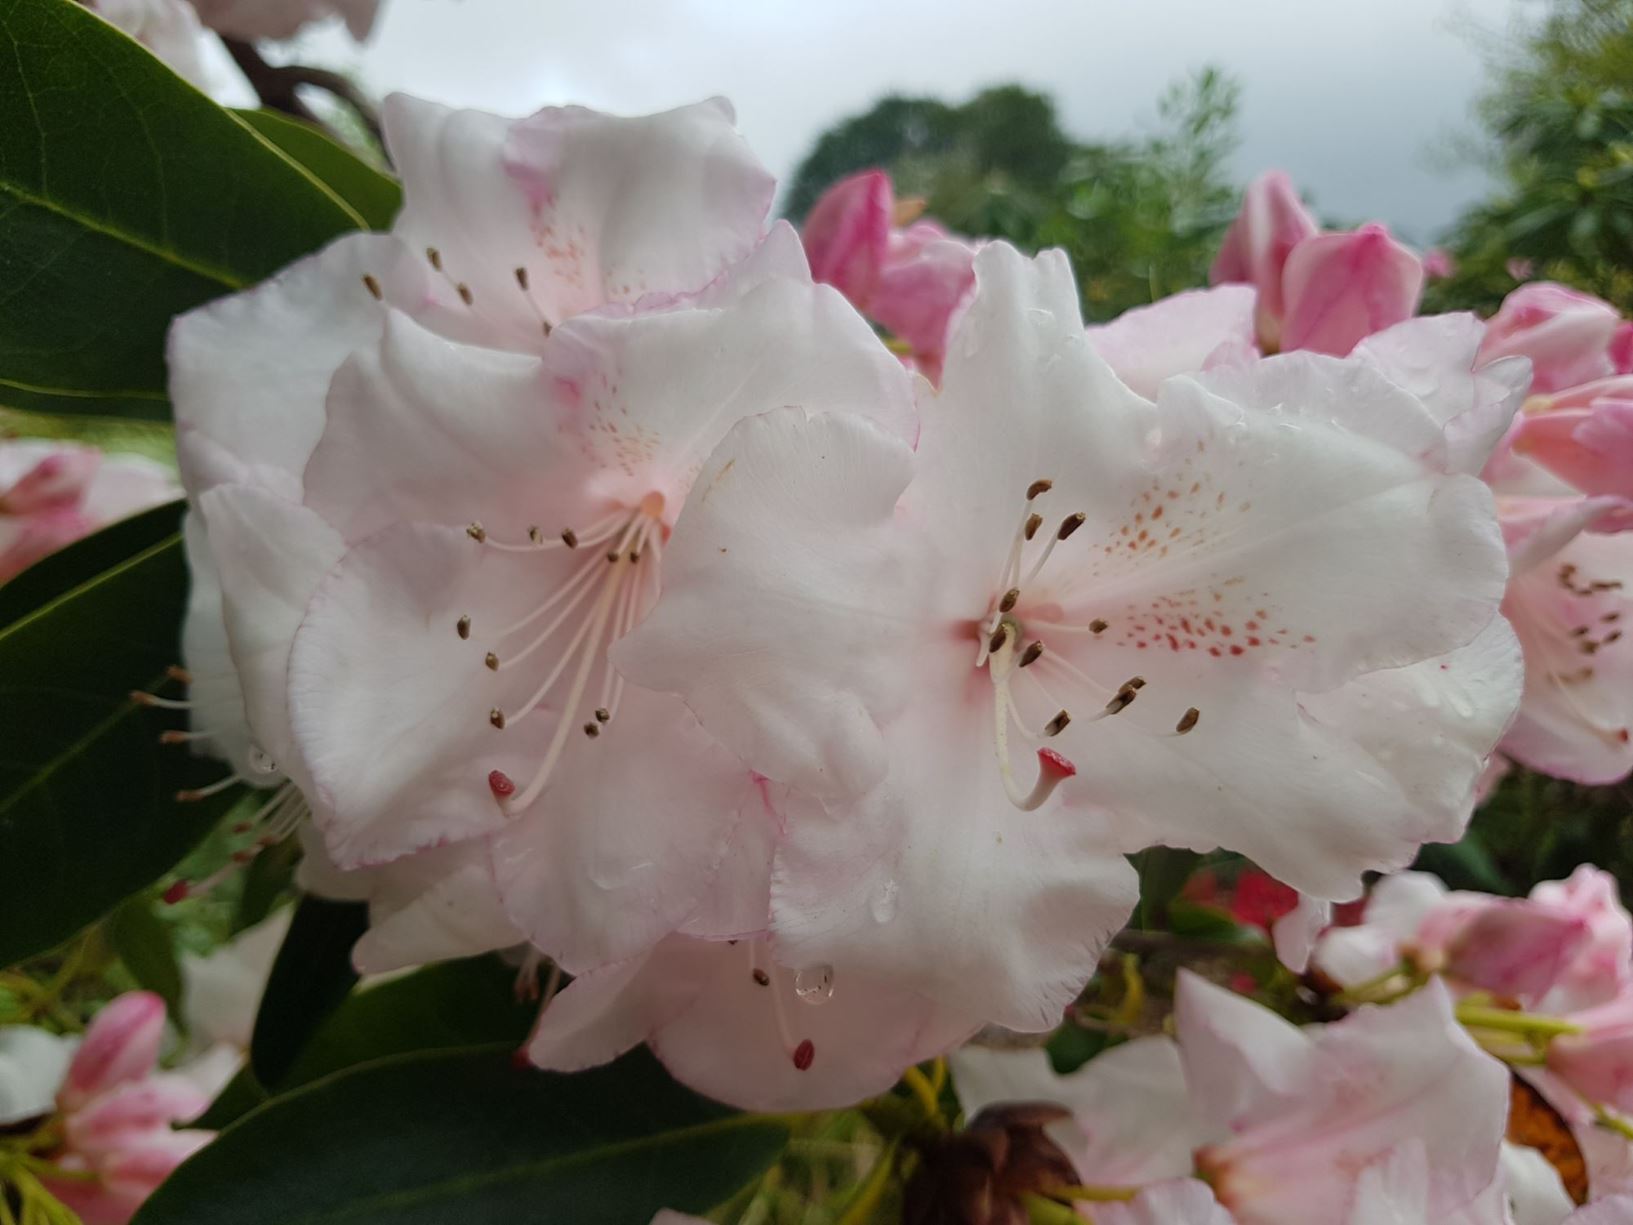 Rhododendron 'Beauty of Littleworth'